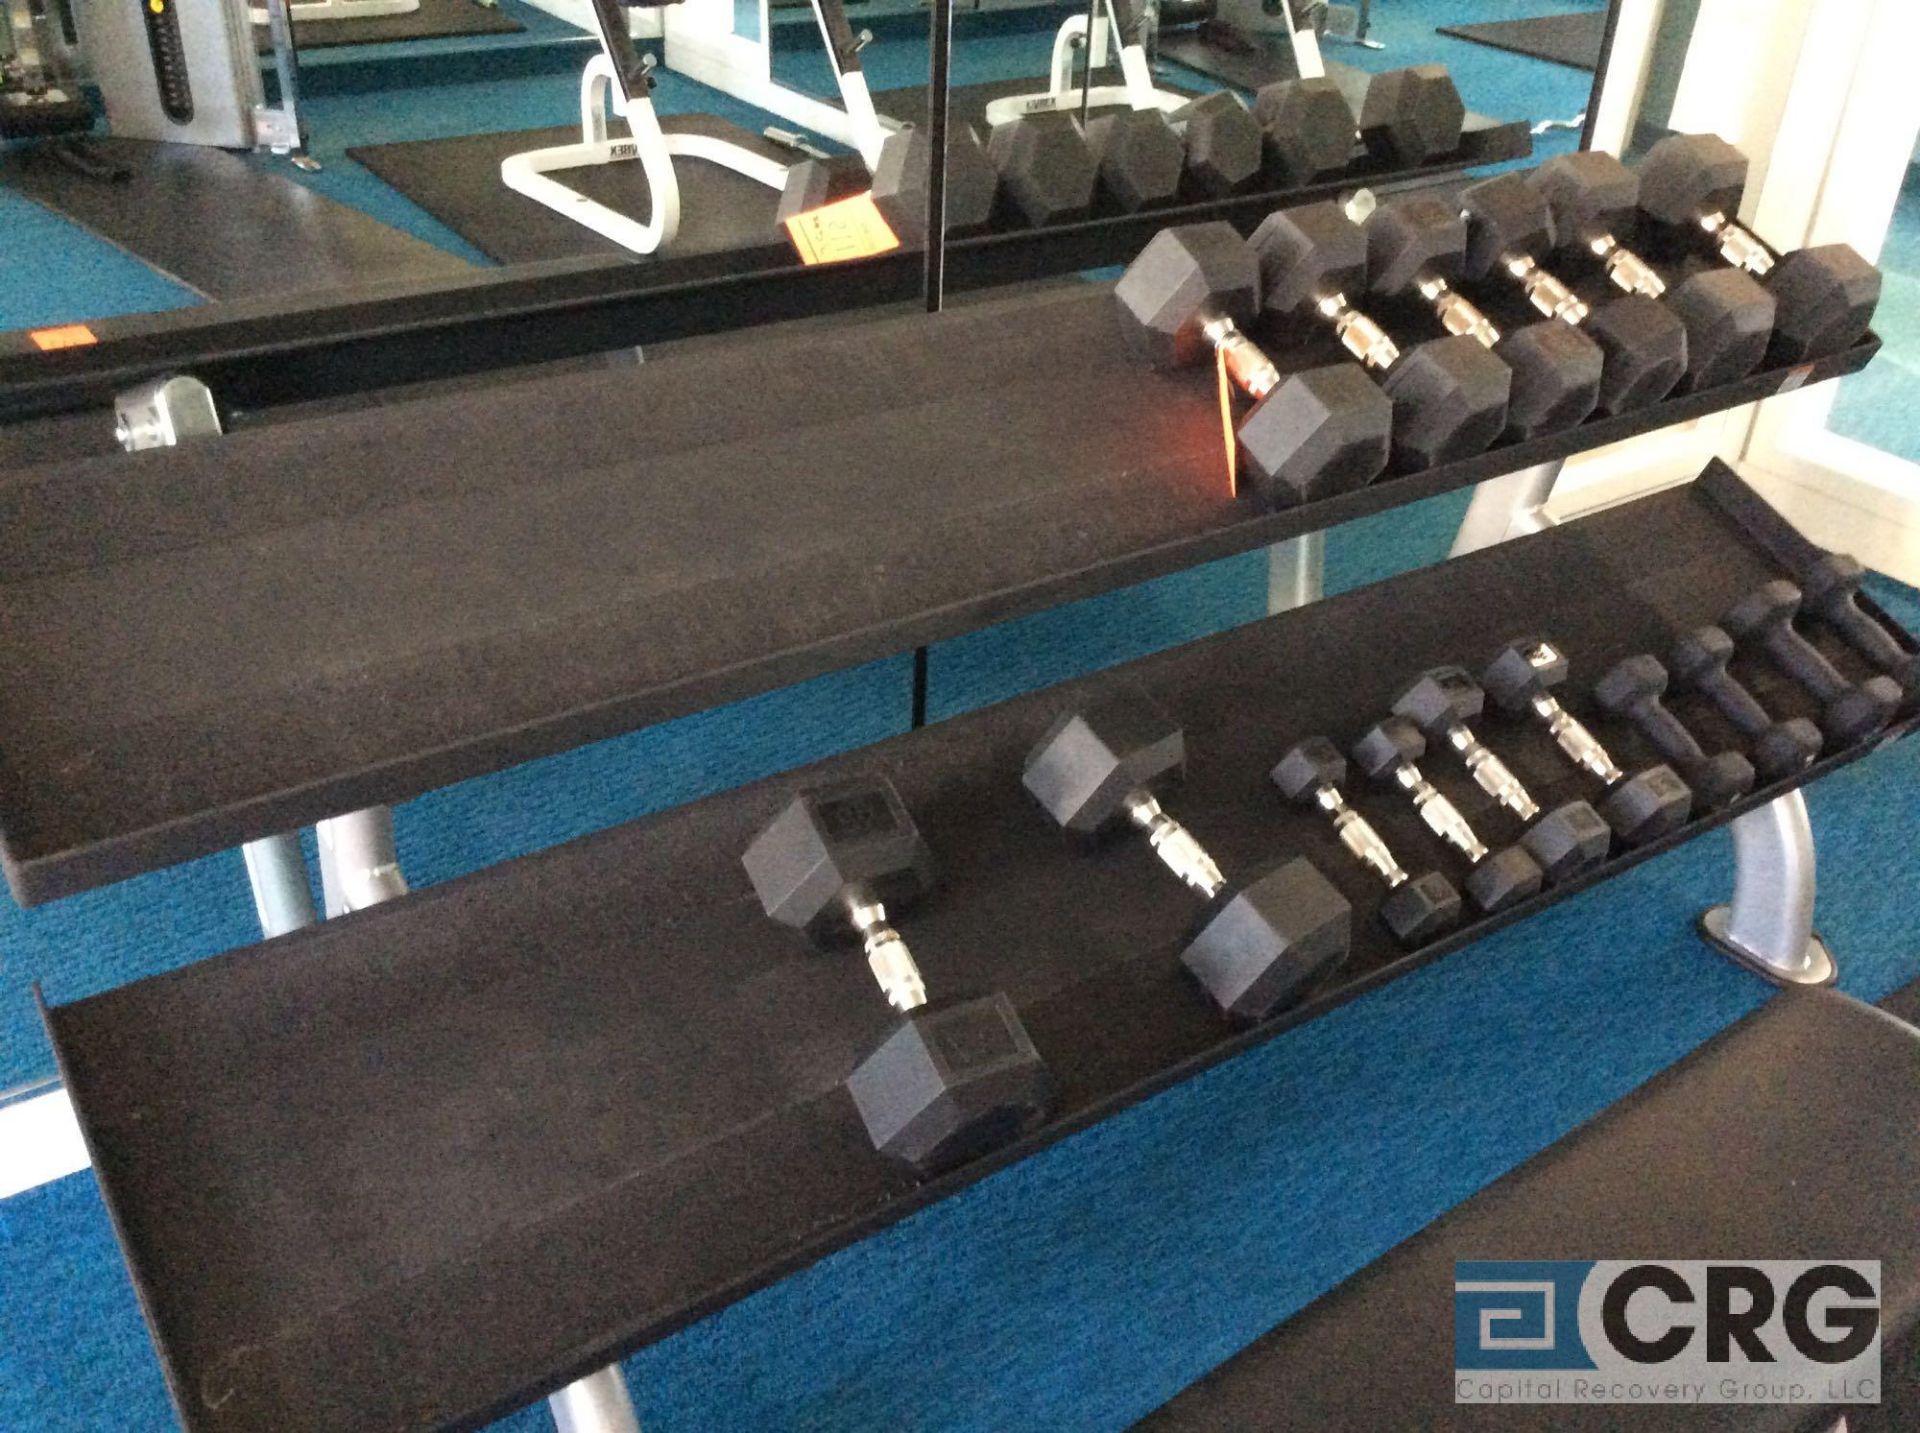 Lot of (27) assorted Cybex Dumbbells with Stands, and (6) asst AB Workout Stands, Stations and - Image 2 of 6